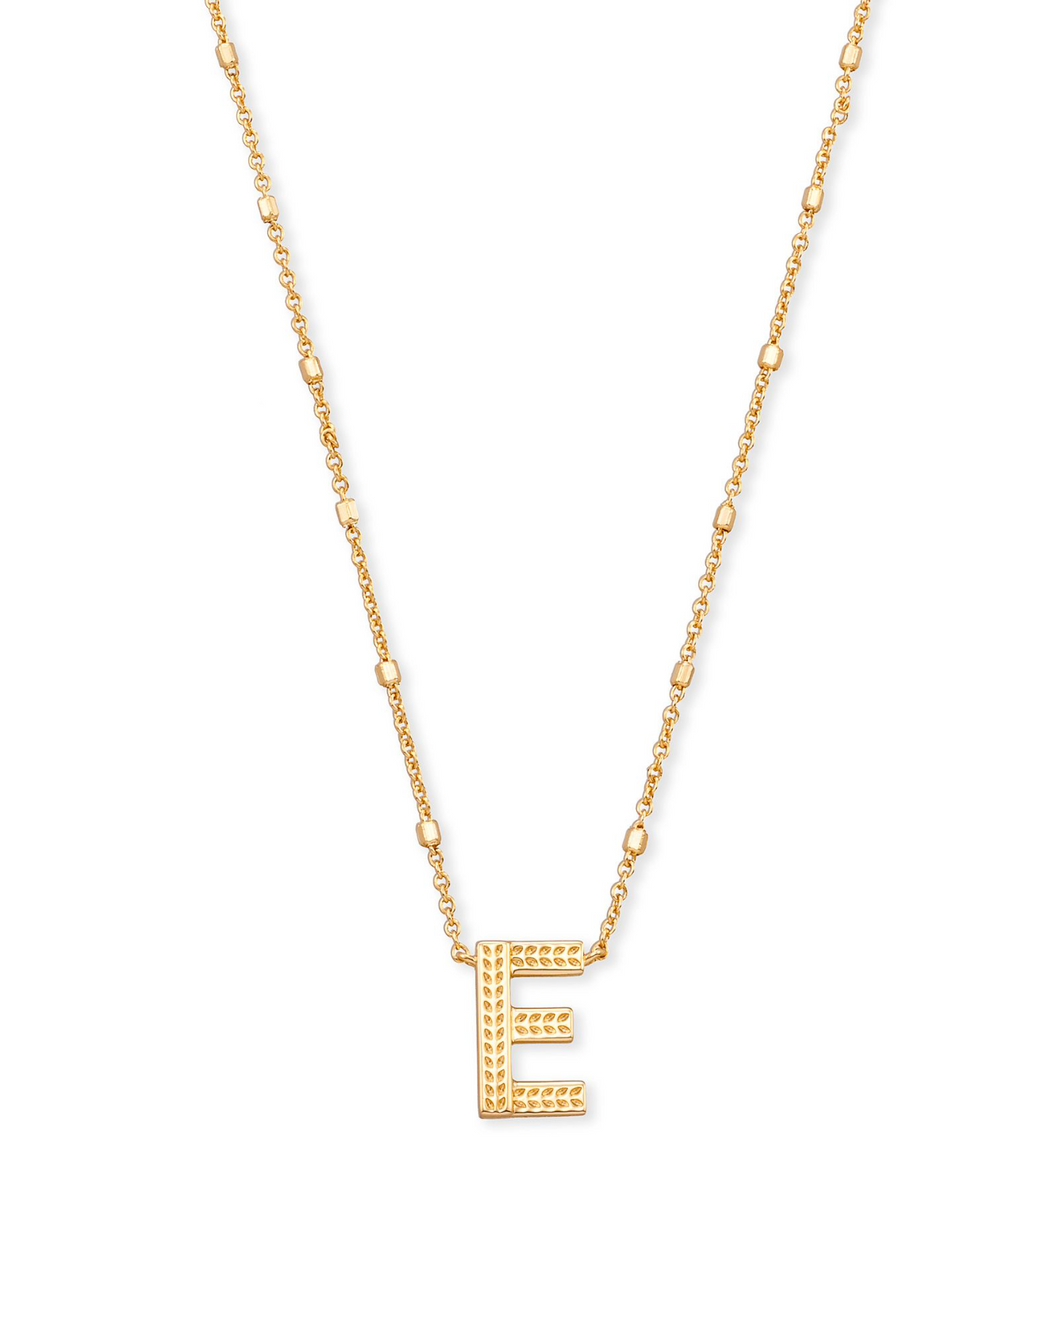 Letter E Pendant Necklace in Gold by Kendra Scott